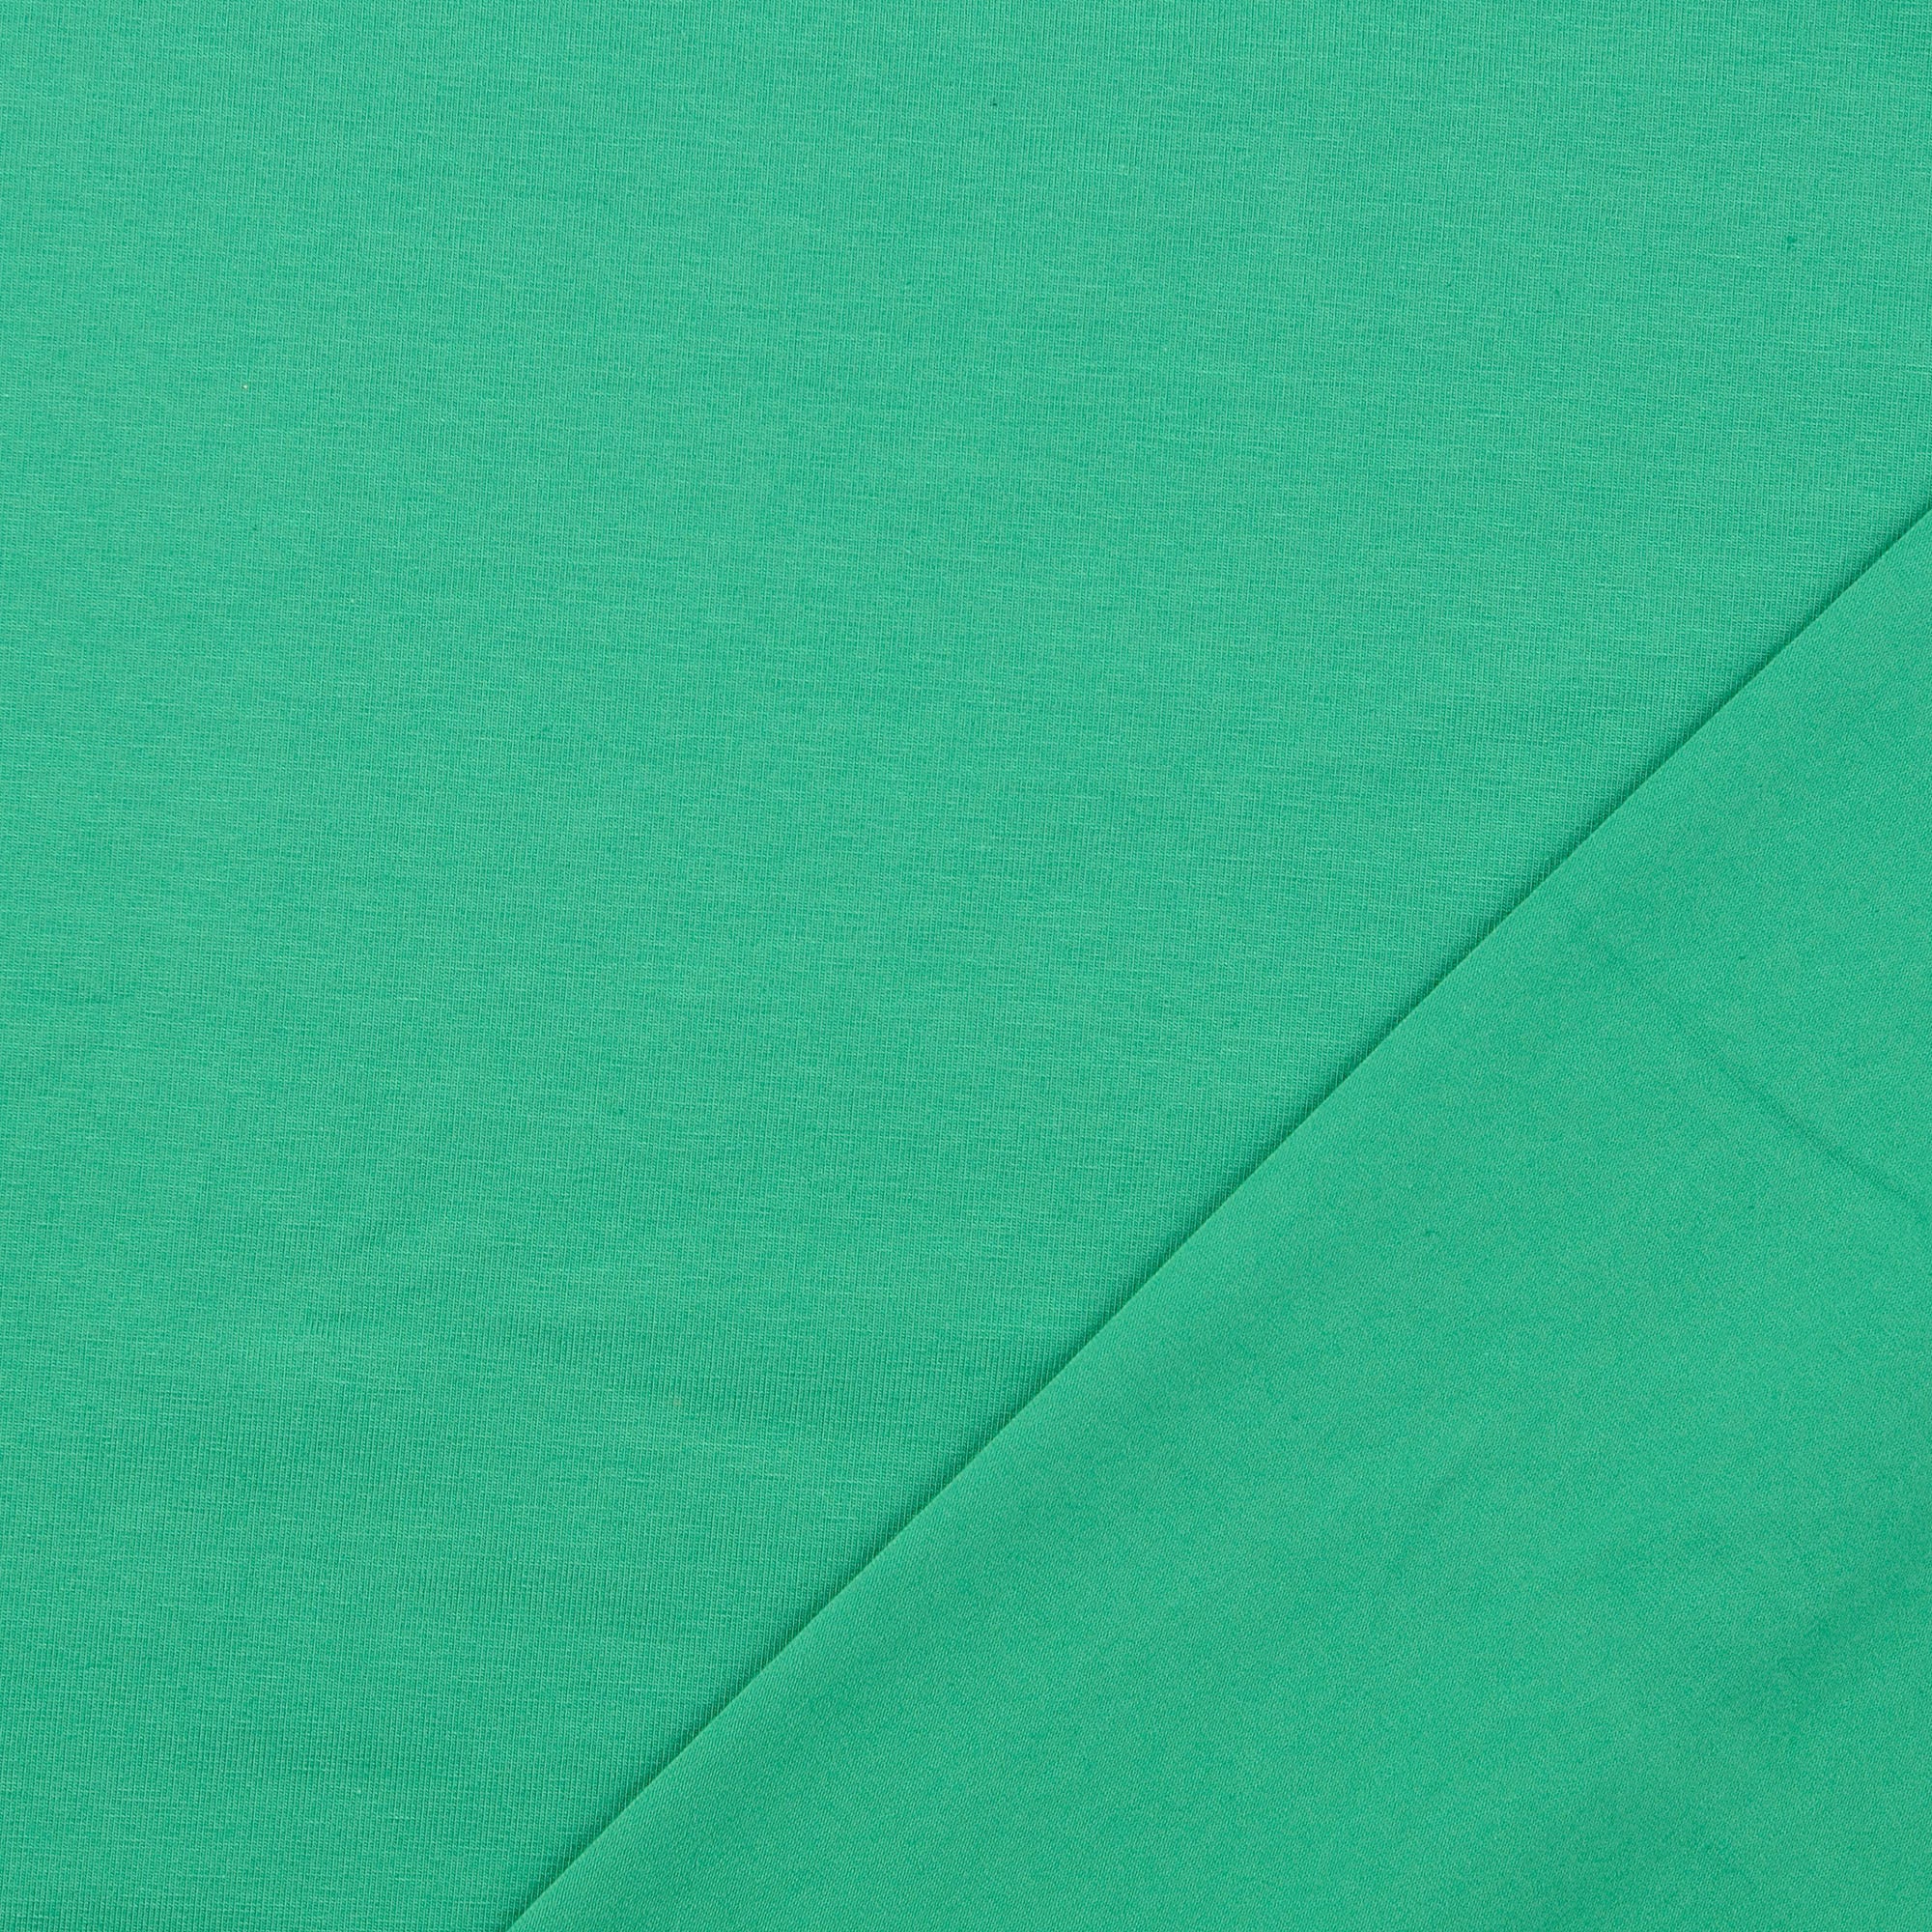 Essential Chic Emerald Green Cotton Jersey Fabric